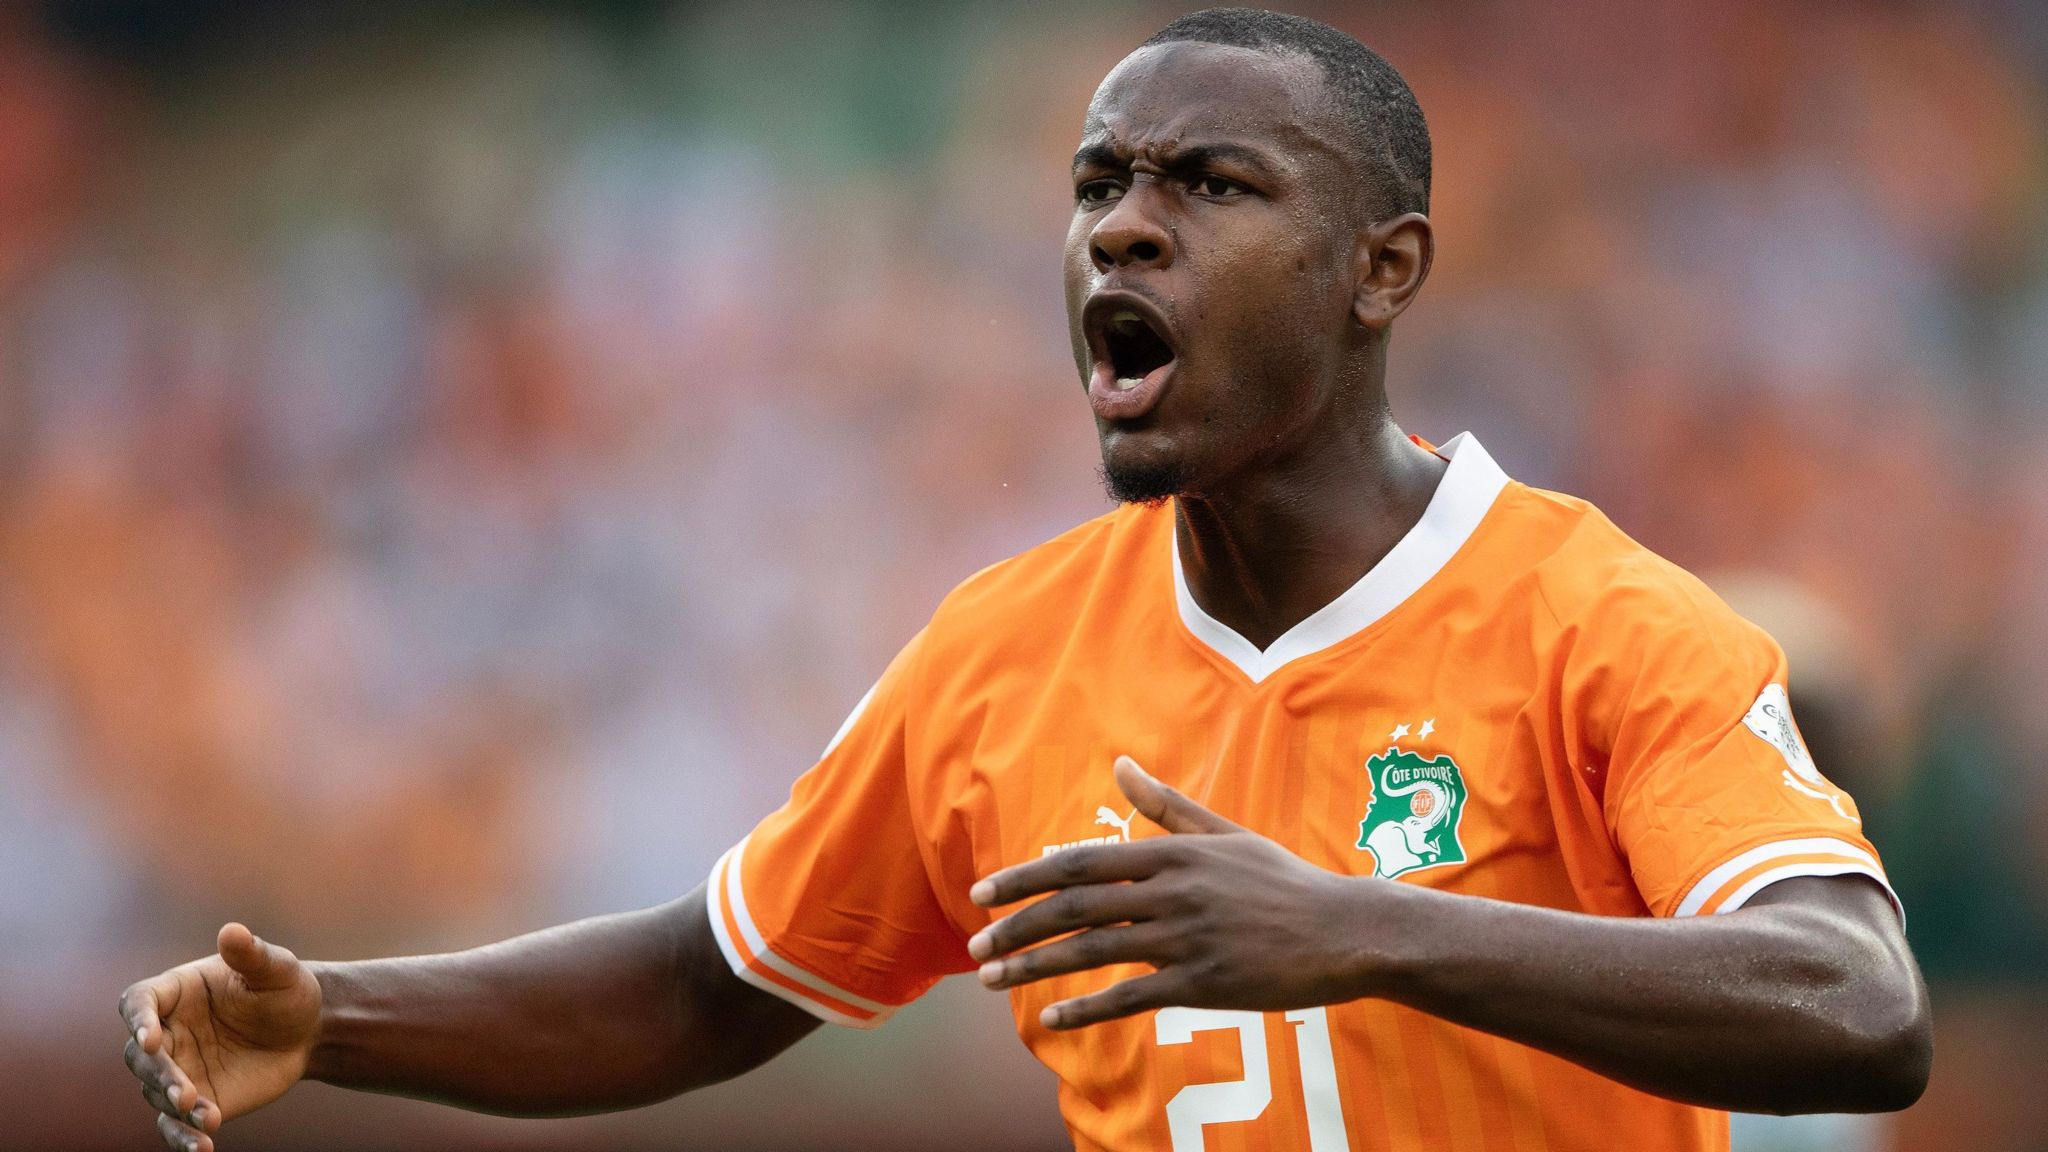 Evan Ndicka in action for Ivory Coast